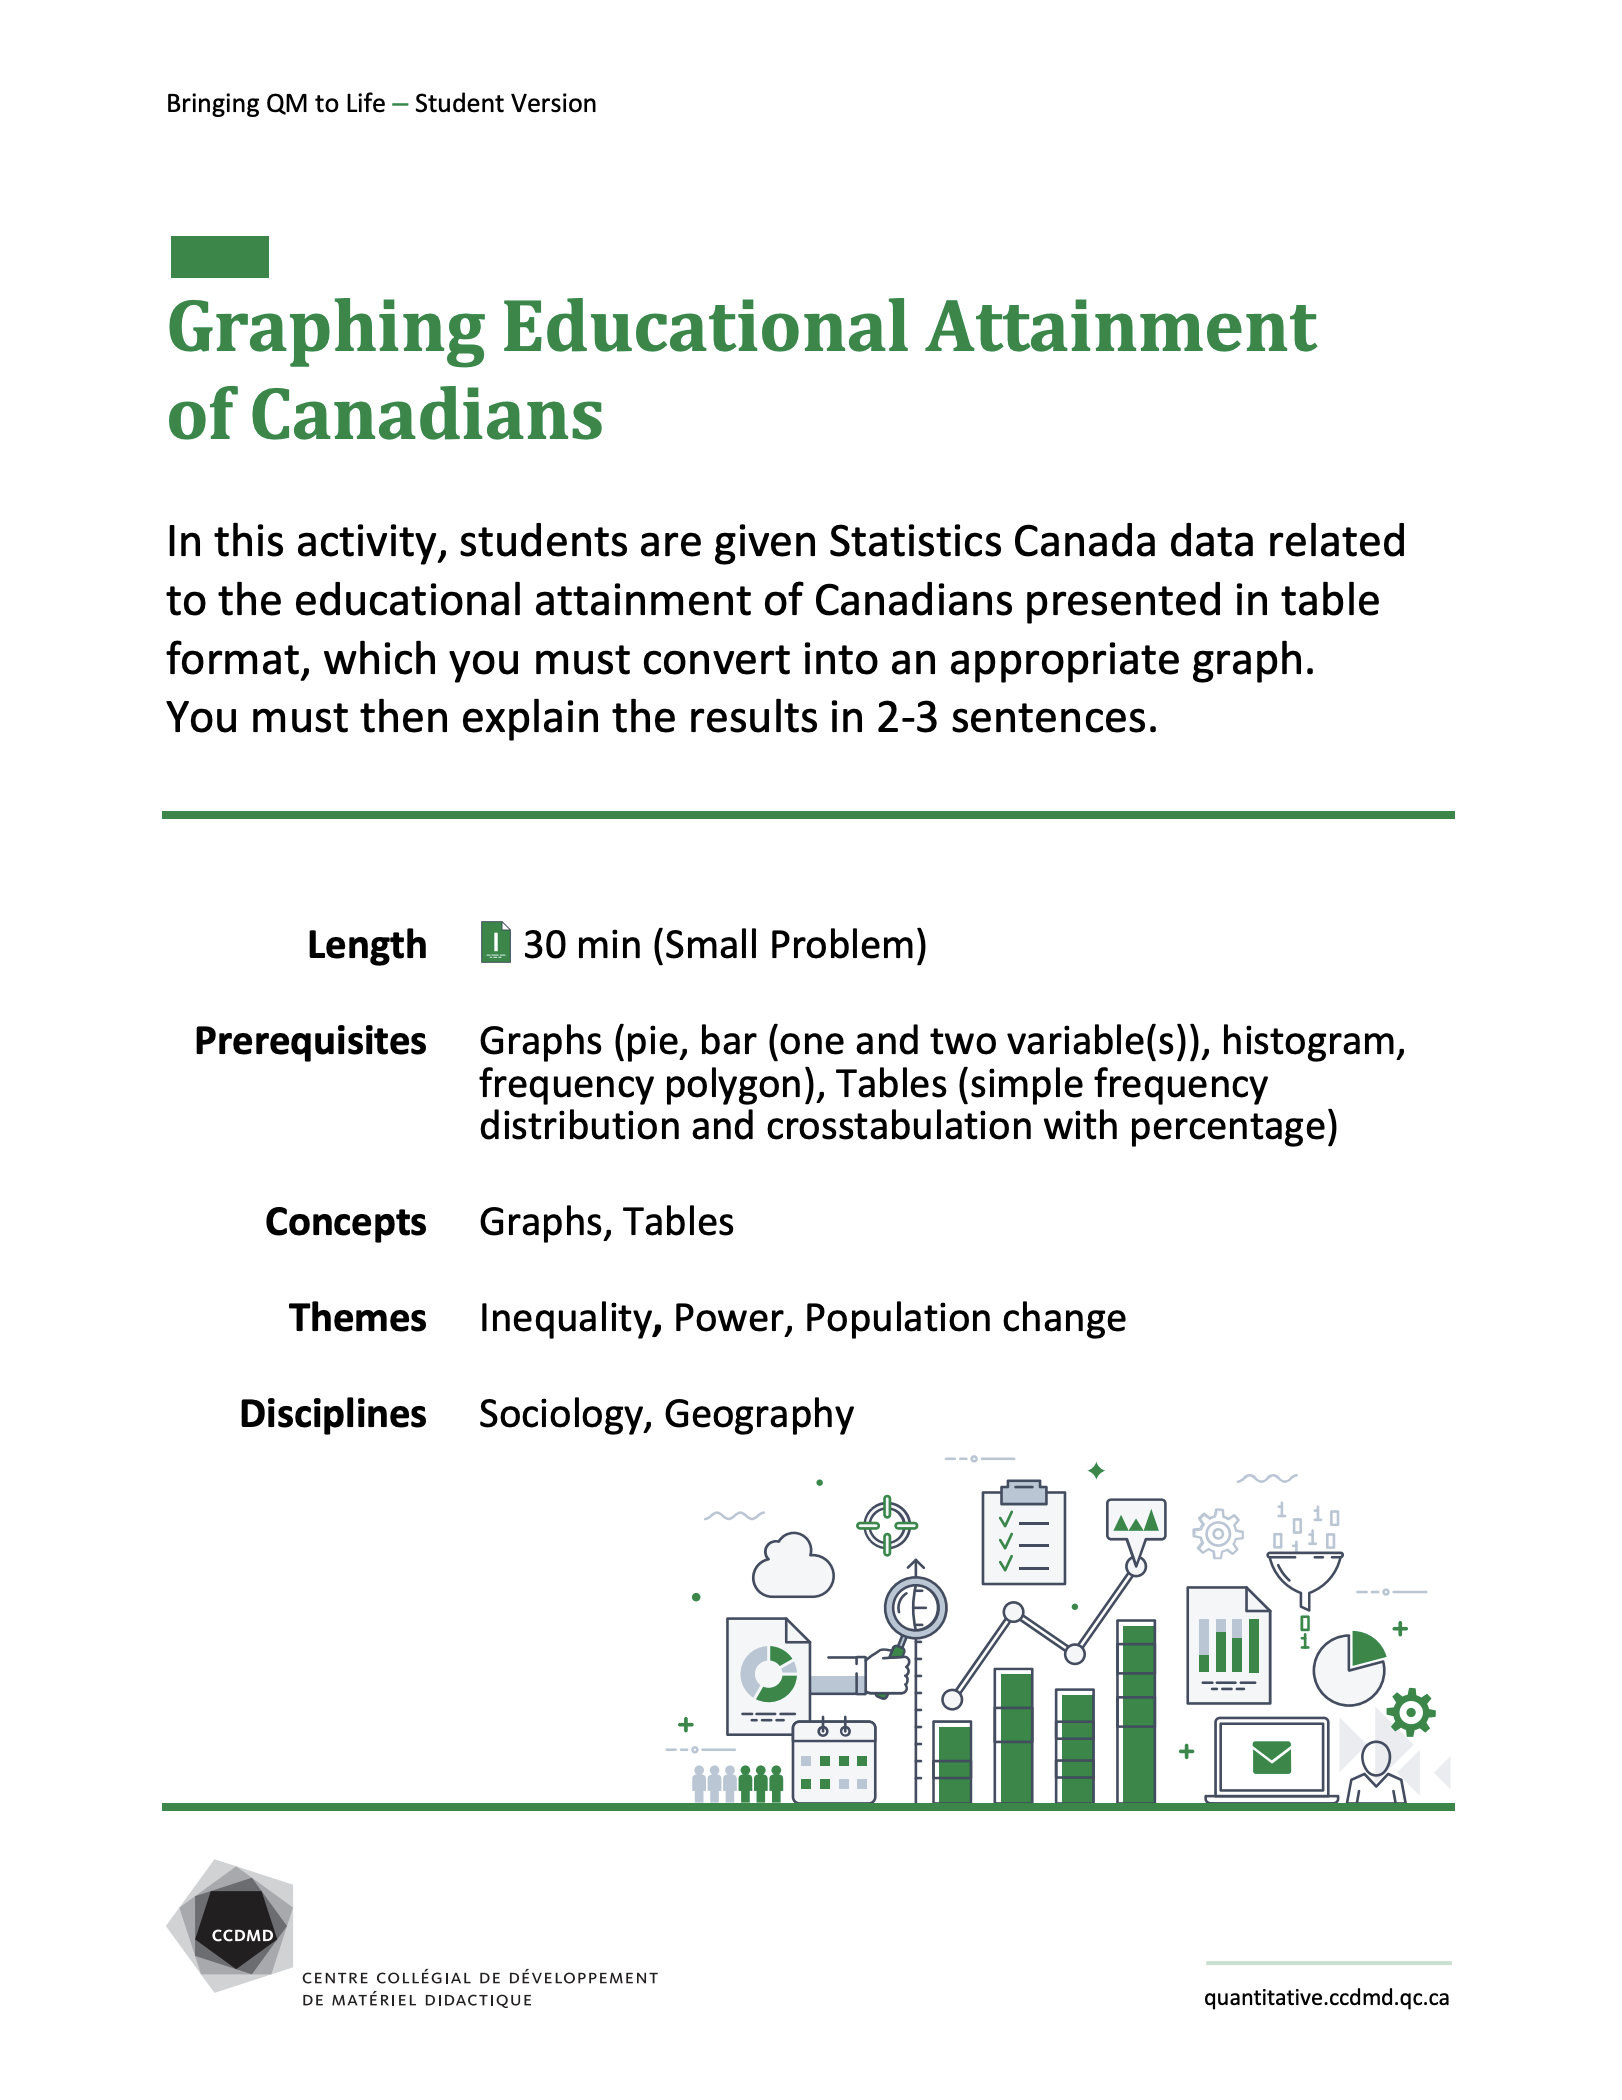 Graphing Educational Attainment of Canadians